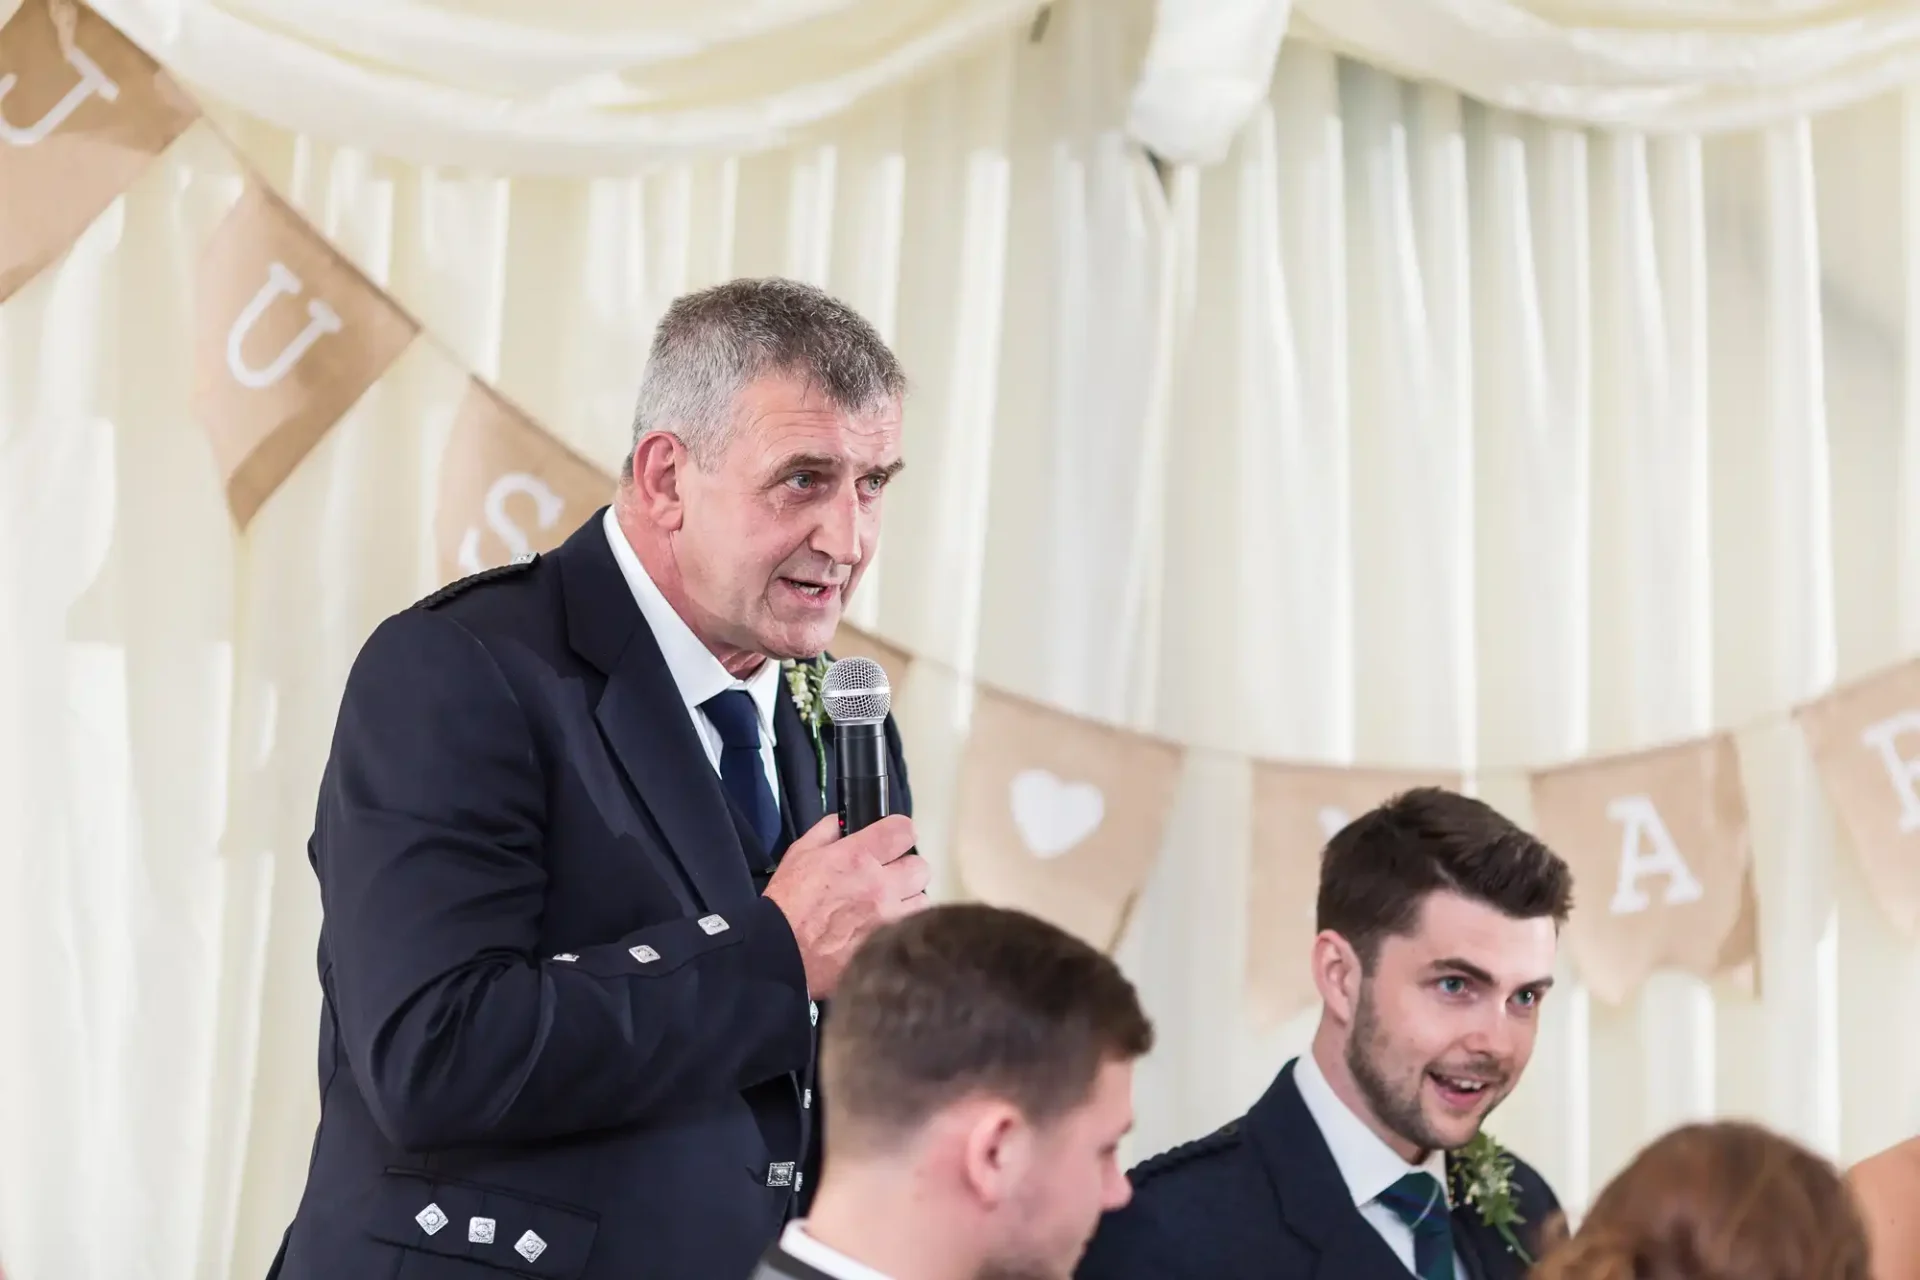 An older man in a suit speaks into a microphone at a wedding reception, with a banner reading "just married" in the background and a young man looking on.